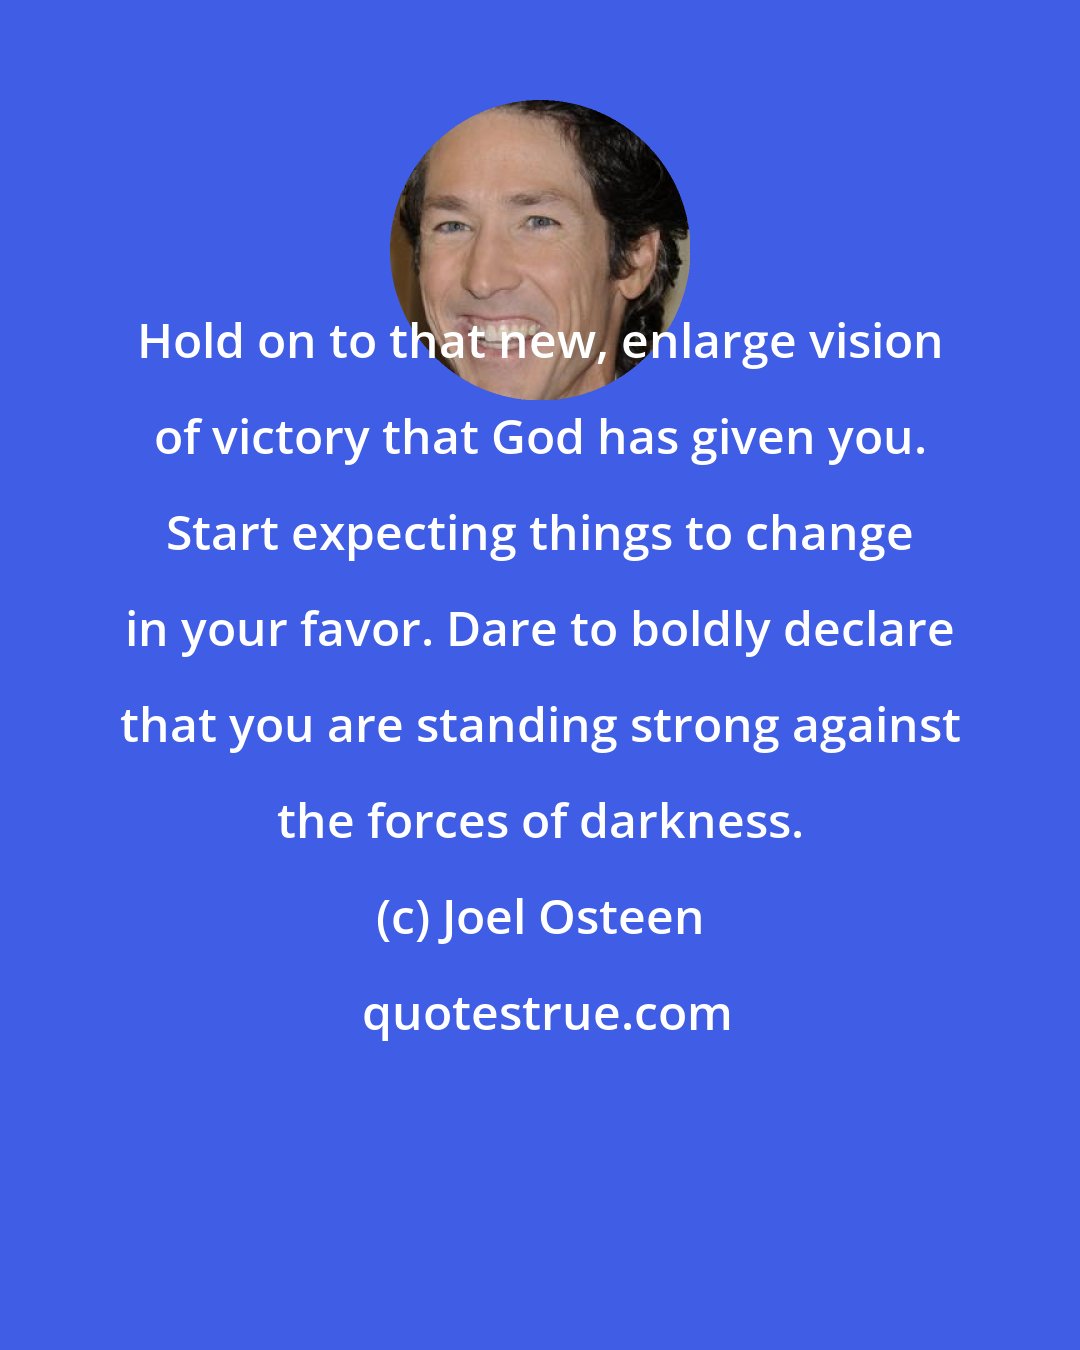 Joel Osteen: Hold on to that new, enlarge vision of victory that God has given you. Start expecting things to change in your favor. Dare to boldly declare that you are standing strong against the forces of darkness.